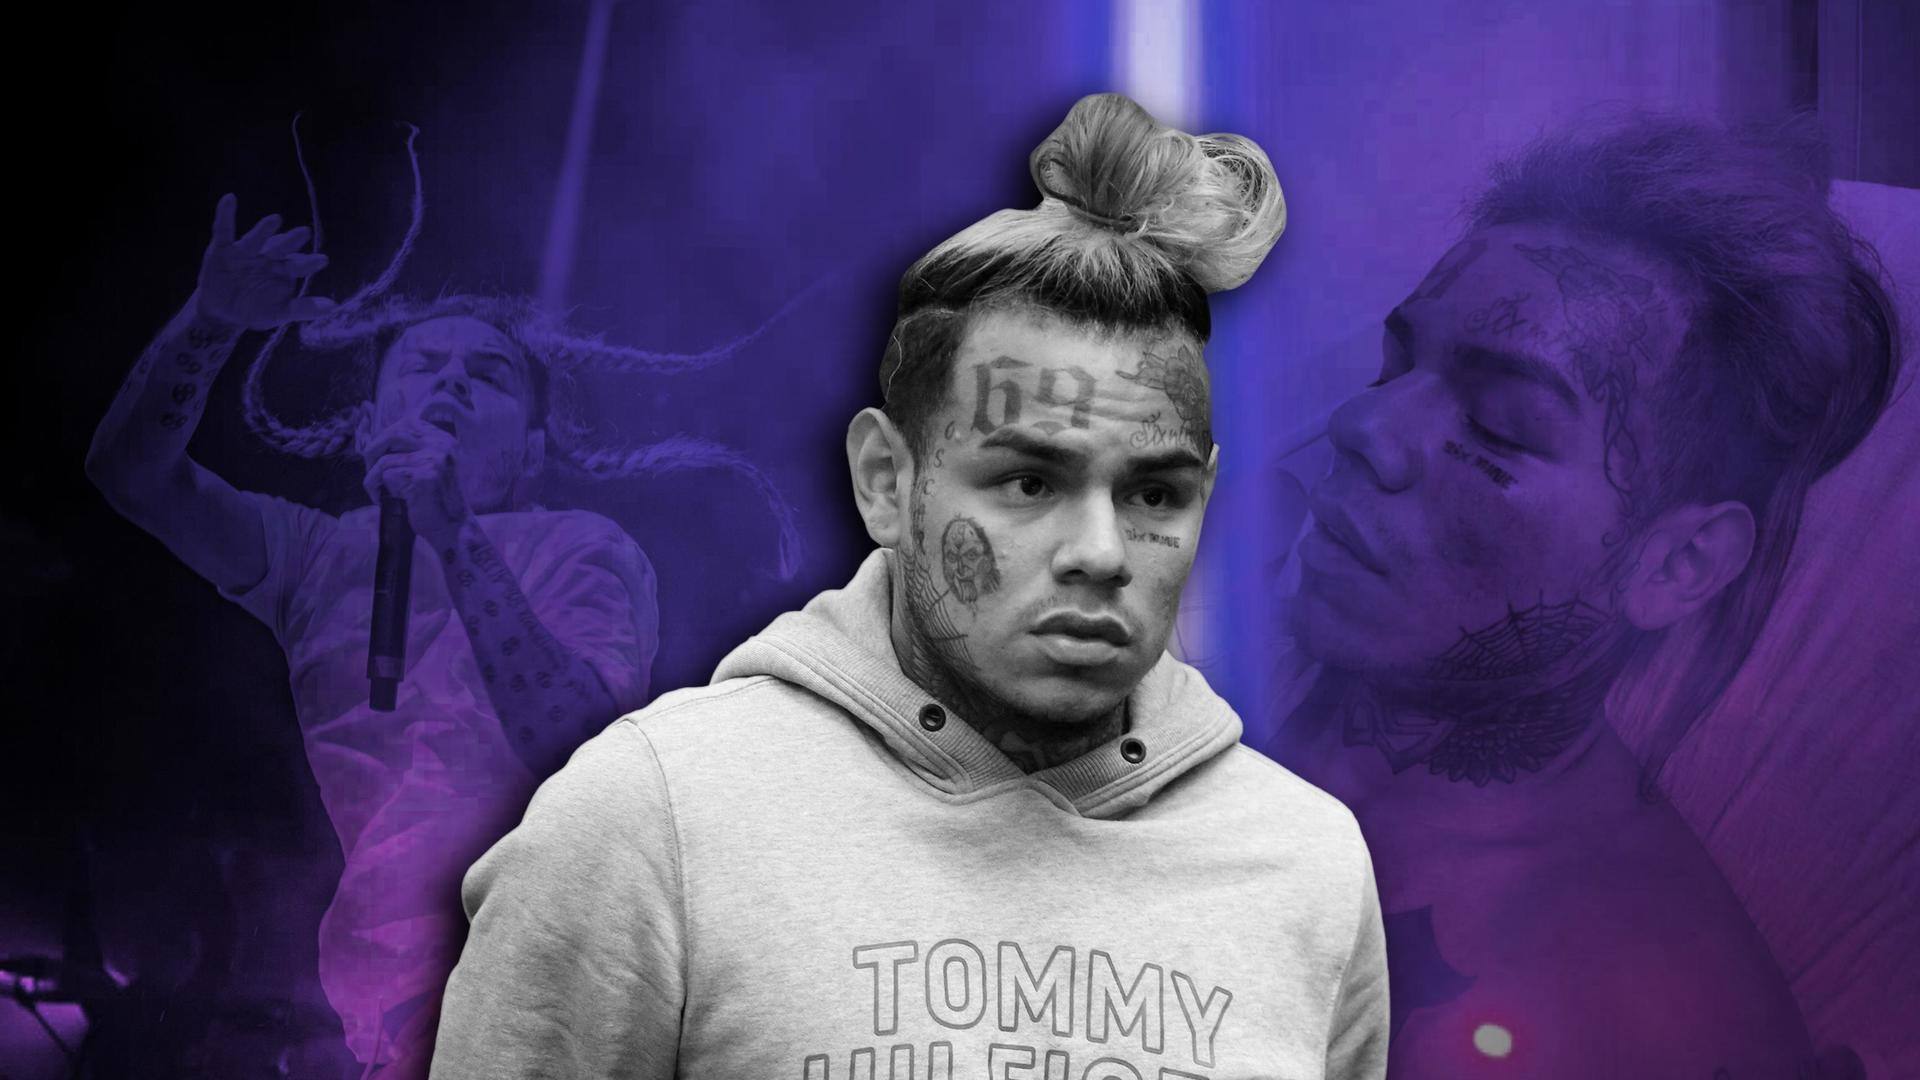 Who's Tekashi 6ix9ine? Rapper hospitalized after getting attacked in gym